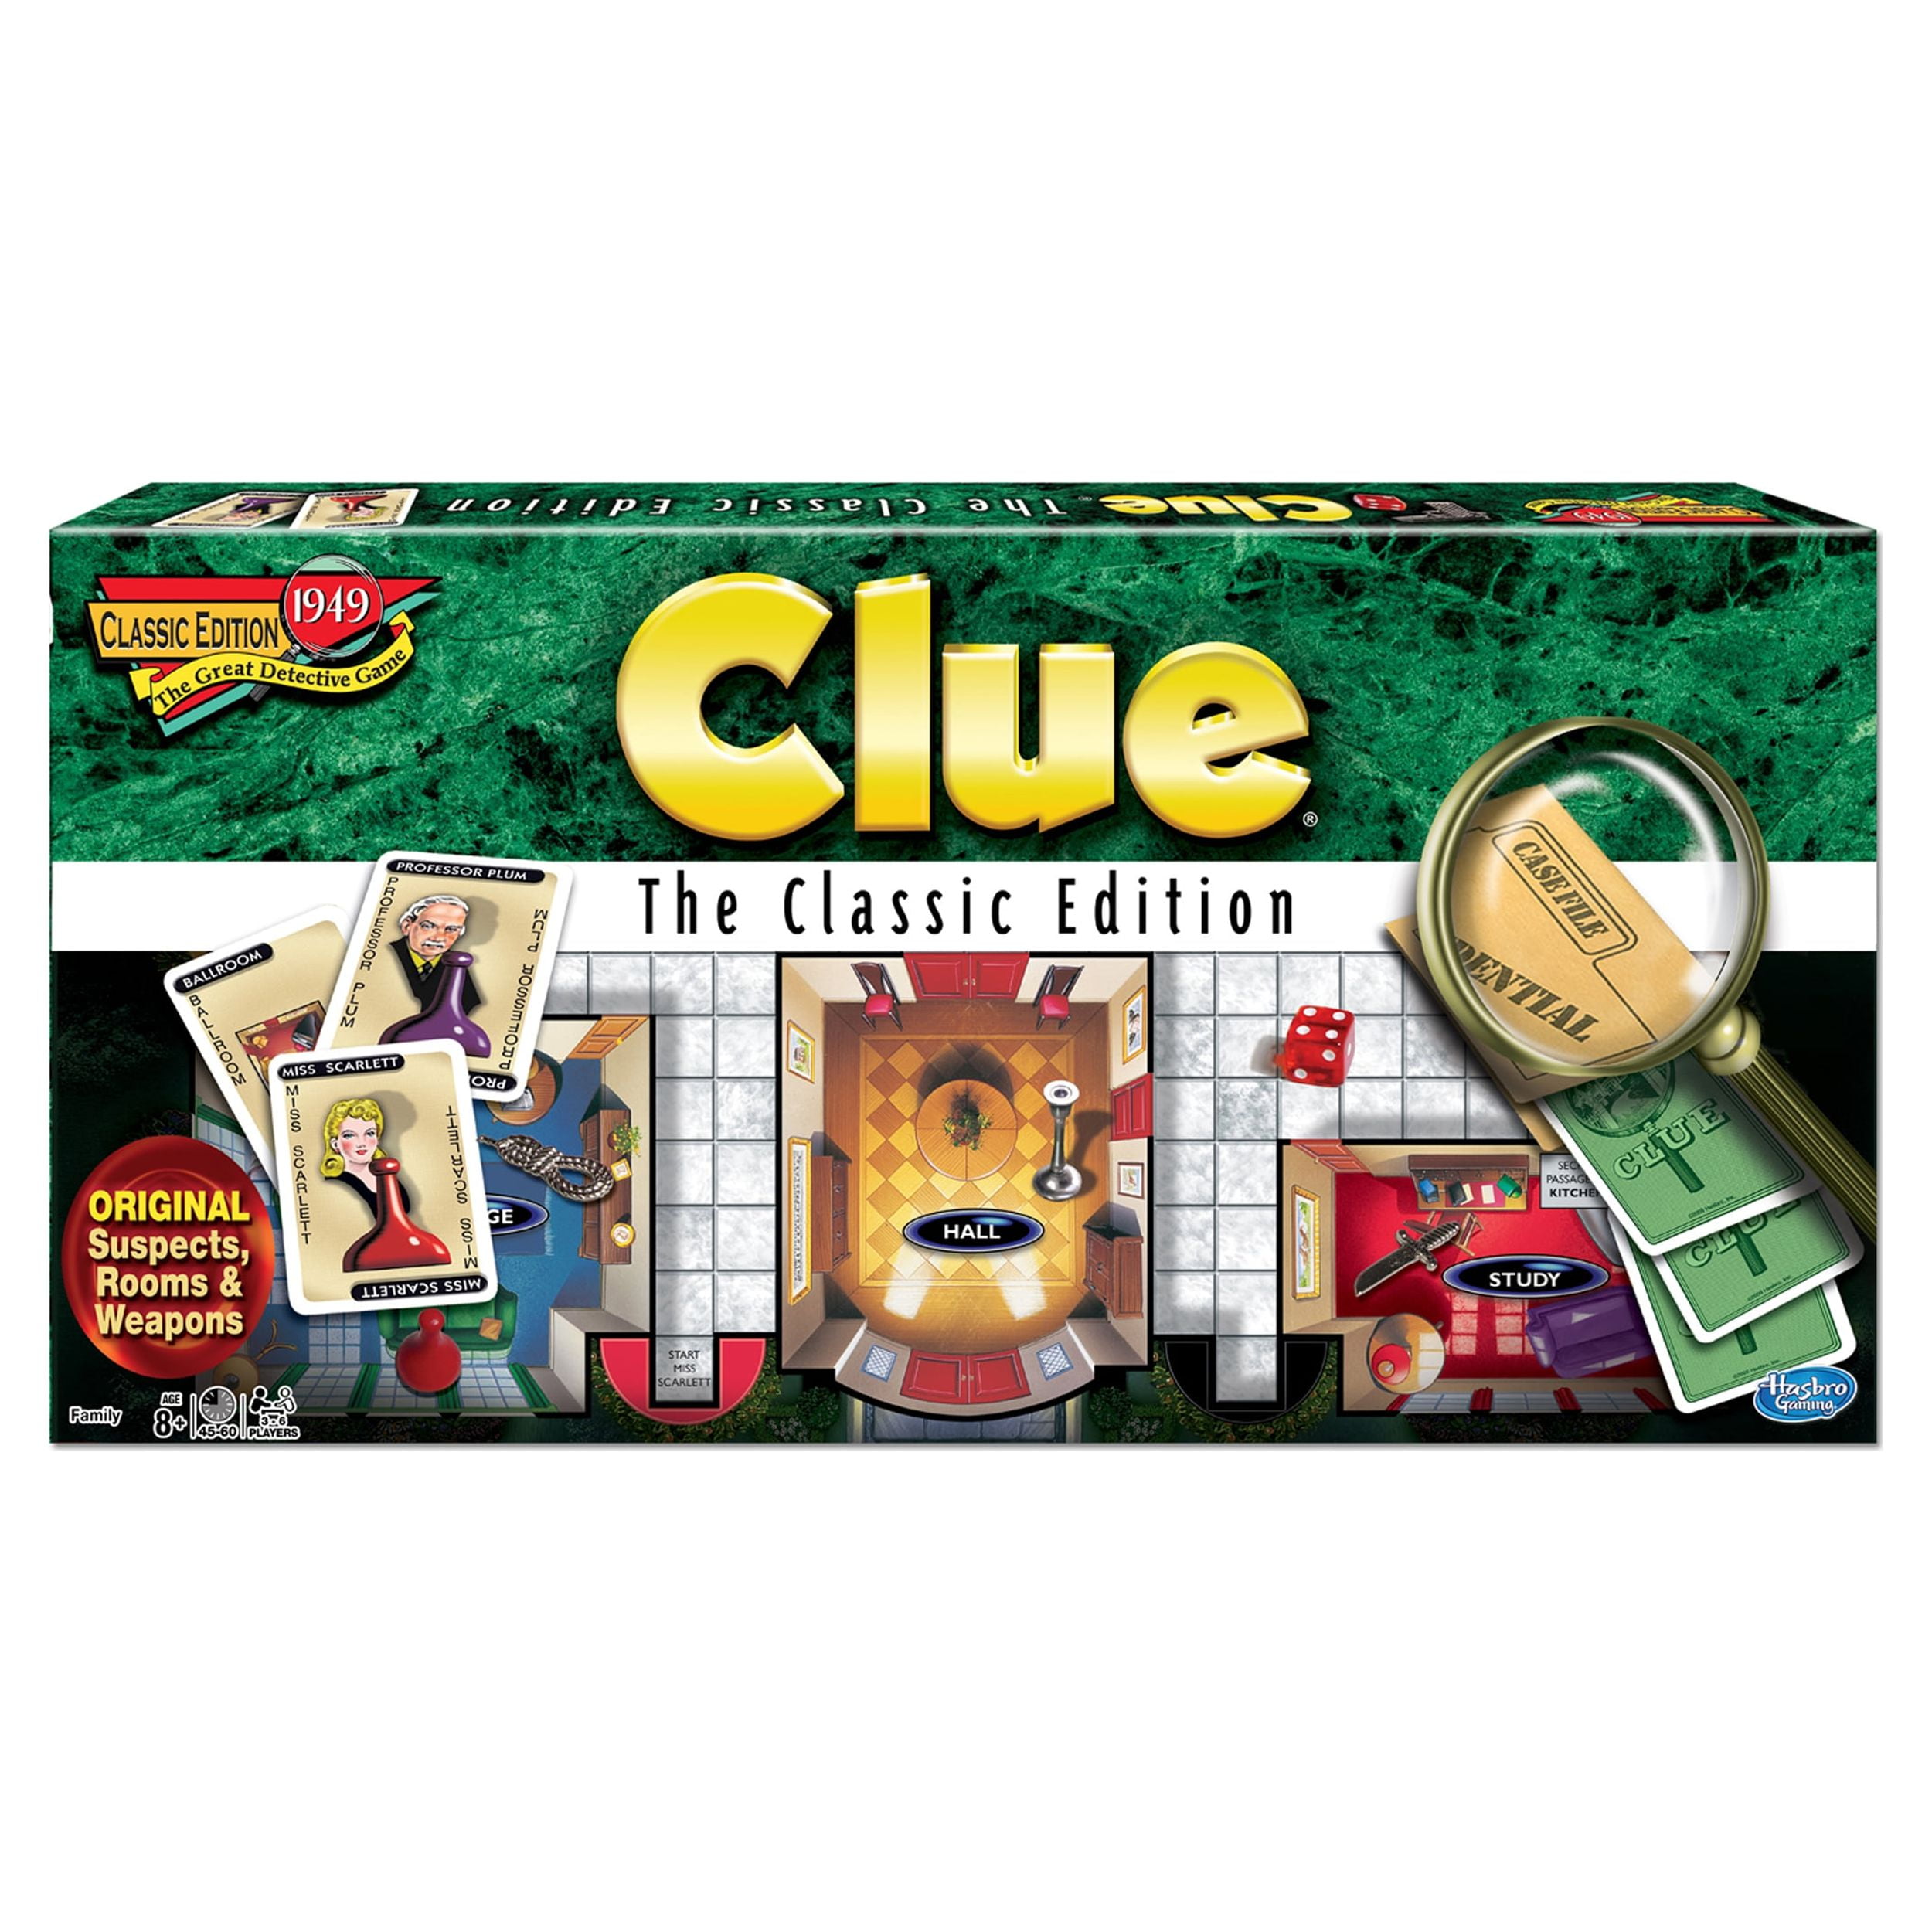 Clue Classic Mystery Board Game : Target